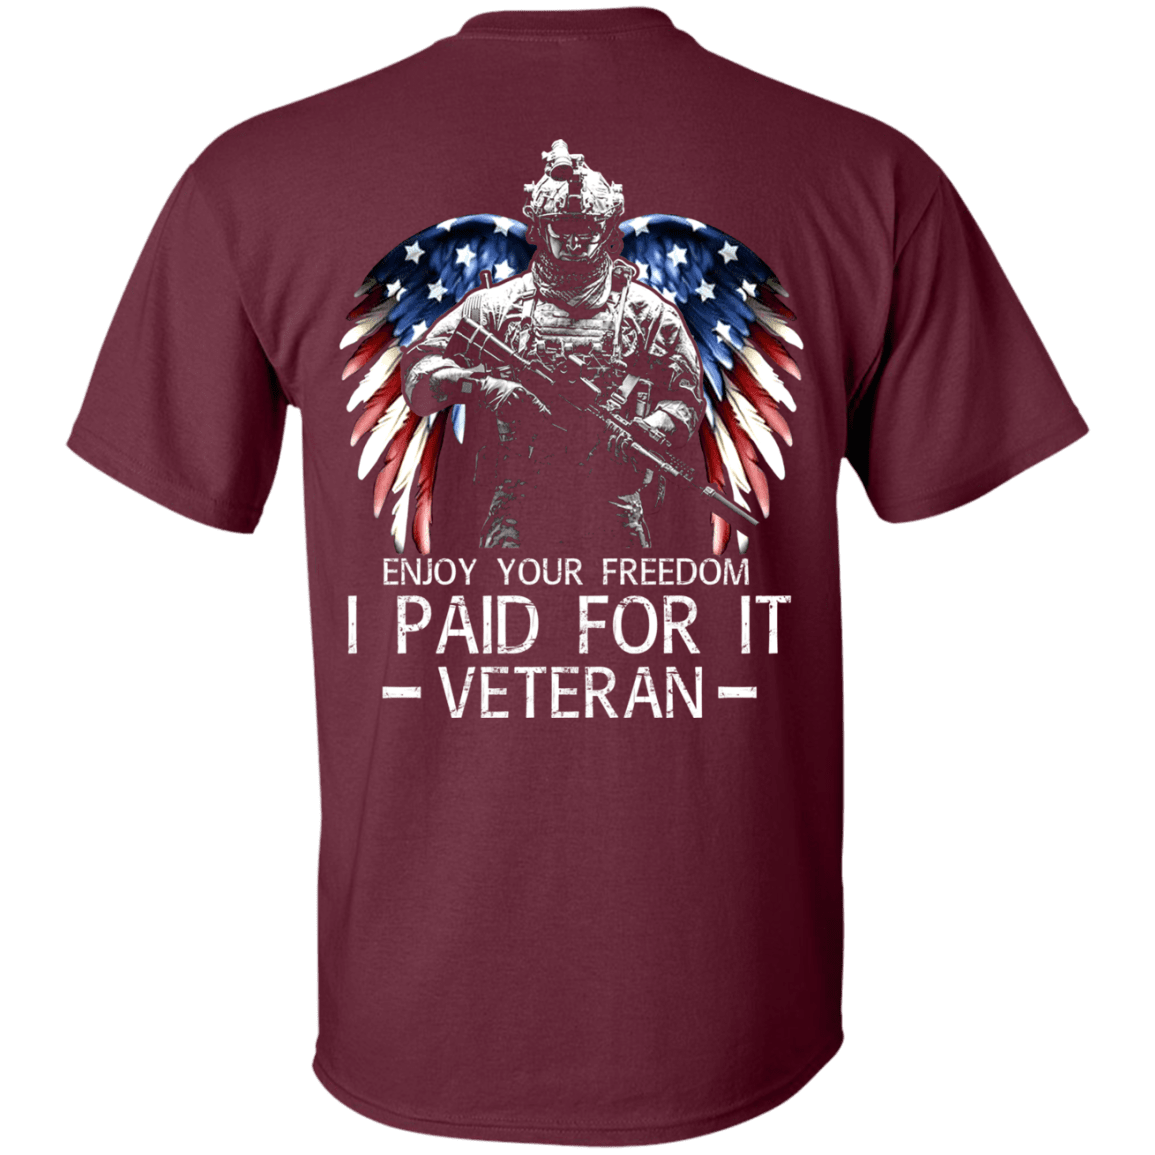 Military T-Shirt "Enjoy your freedom I paid for it" Men Back-TShirt-General-Veterans Nation